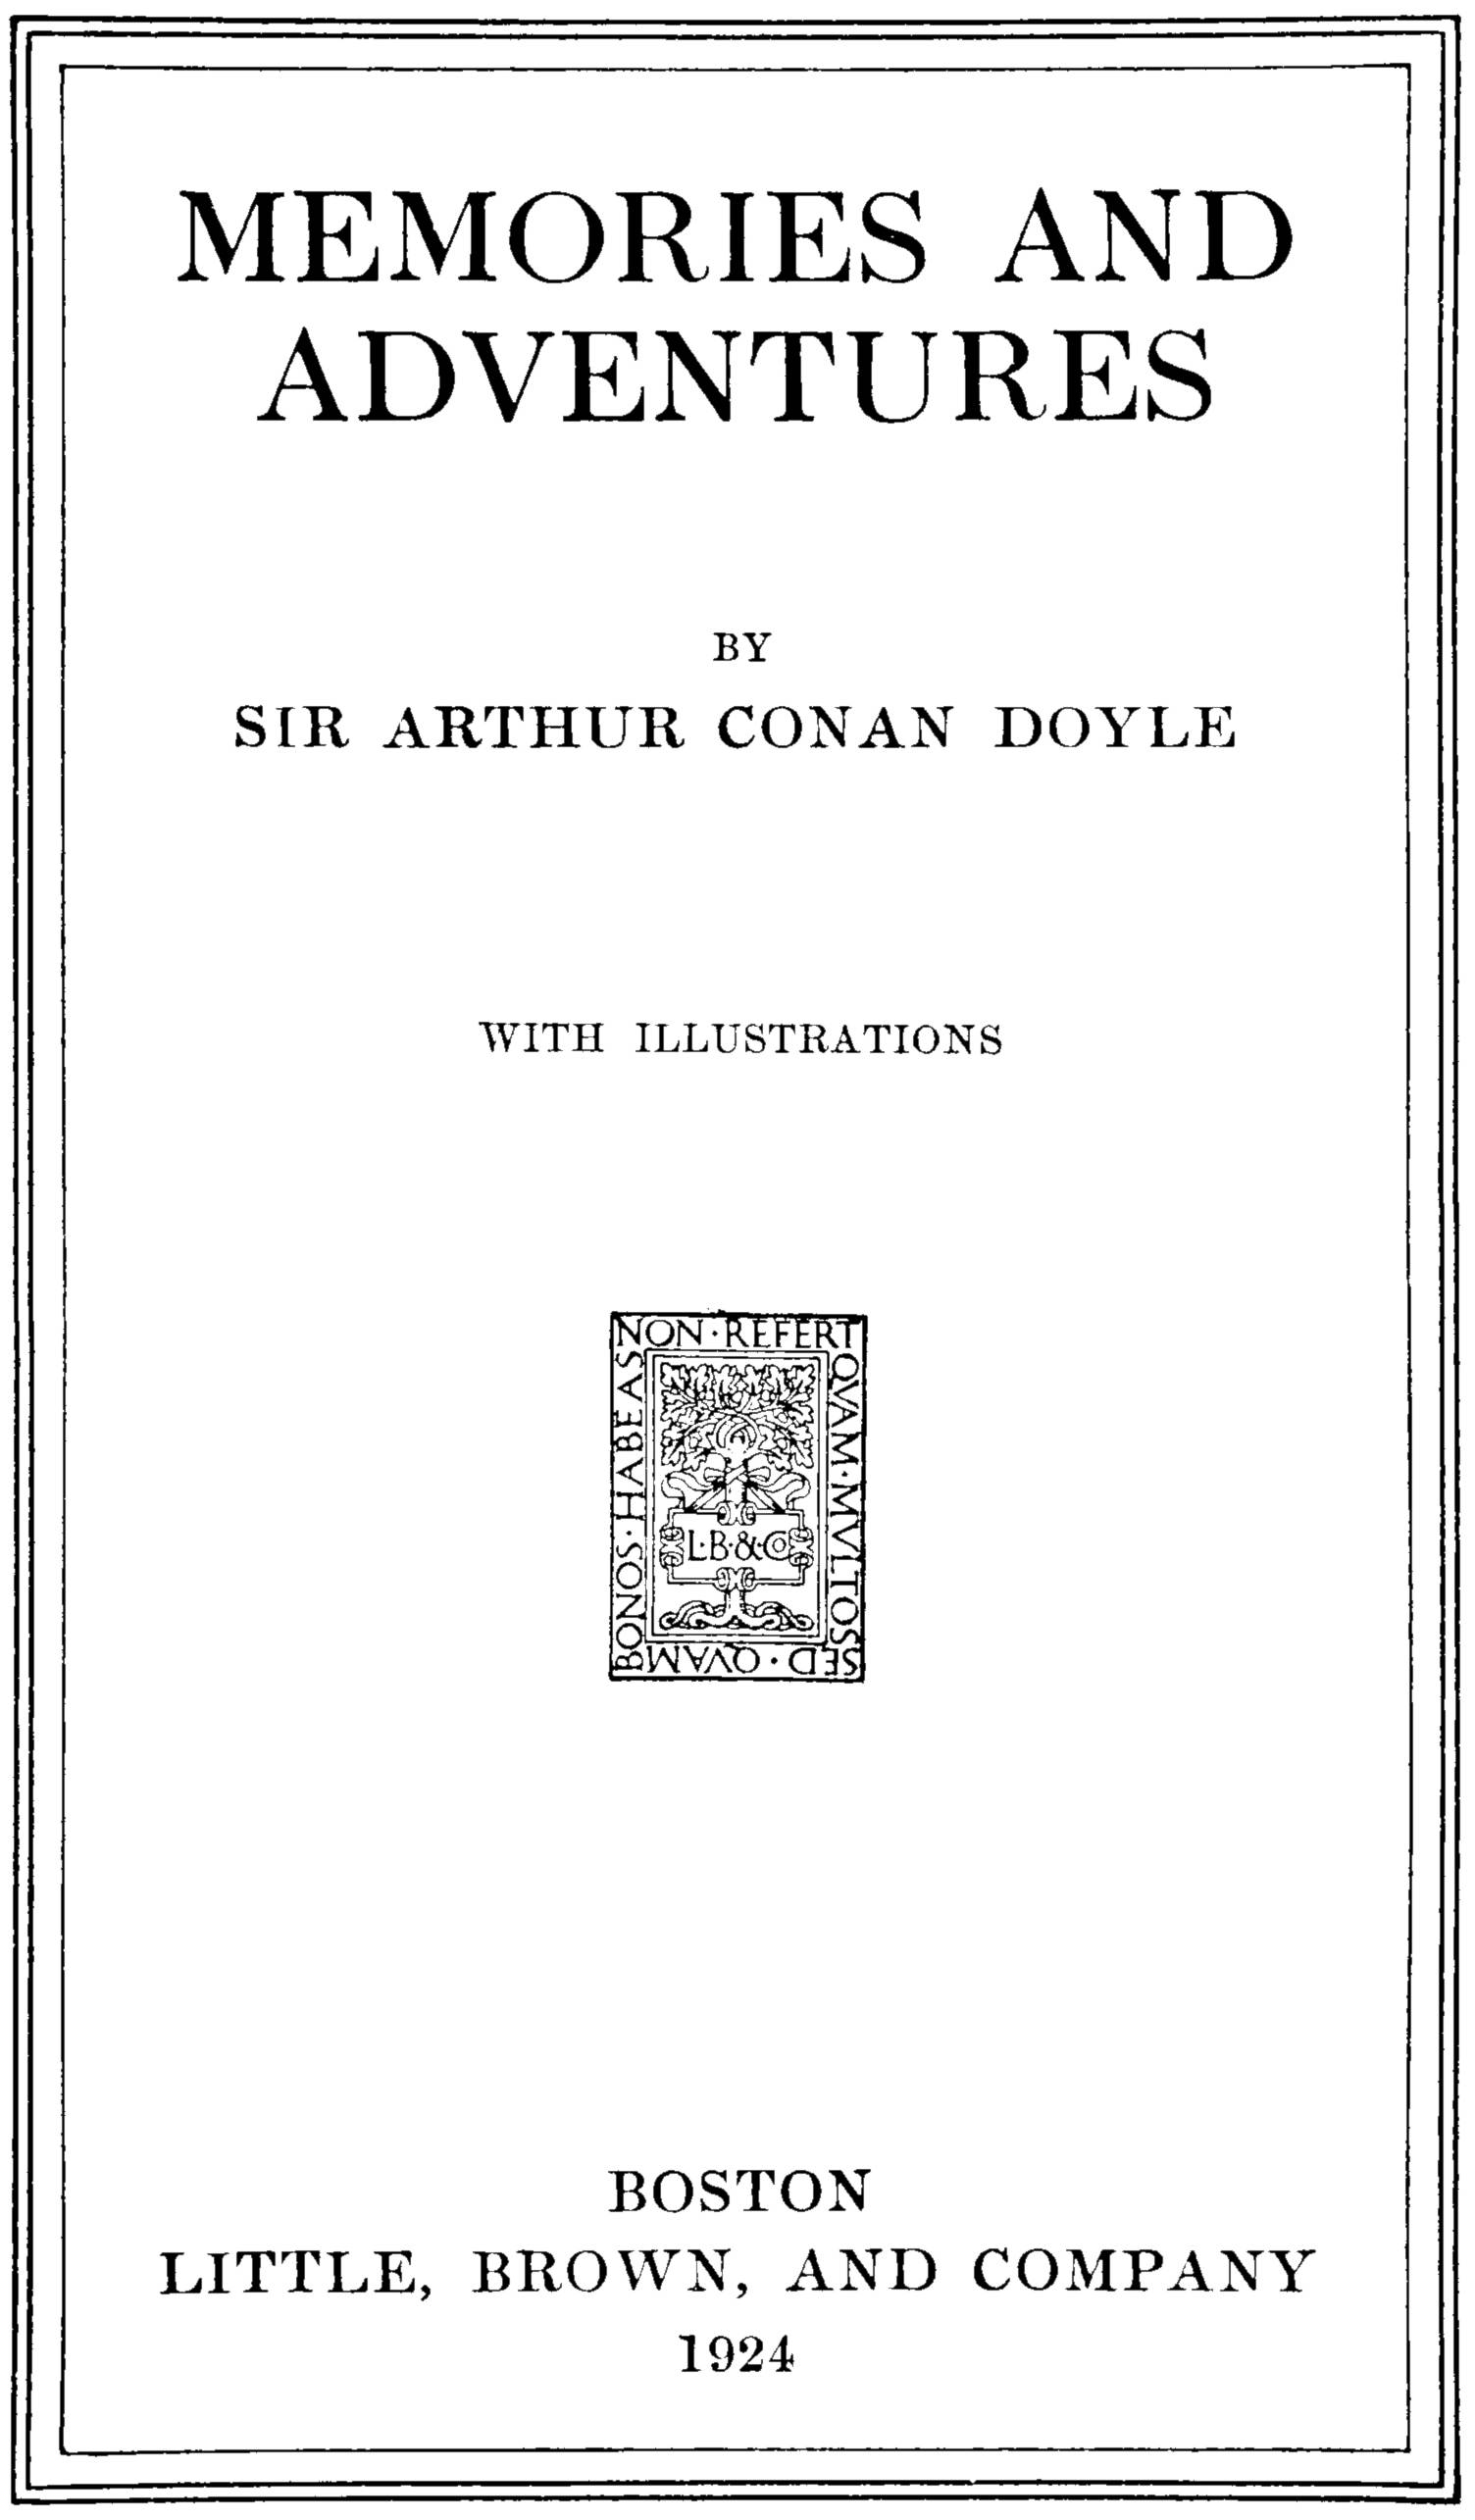 Memories and Adventures, by Sir Arthur Conan Doyle—A Project